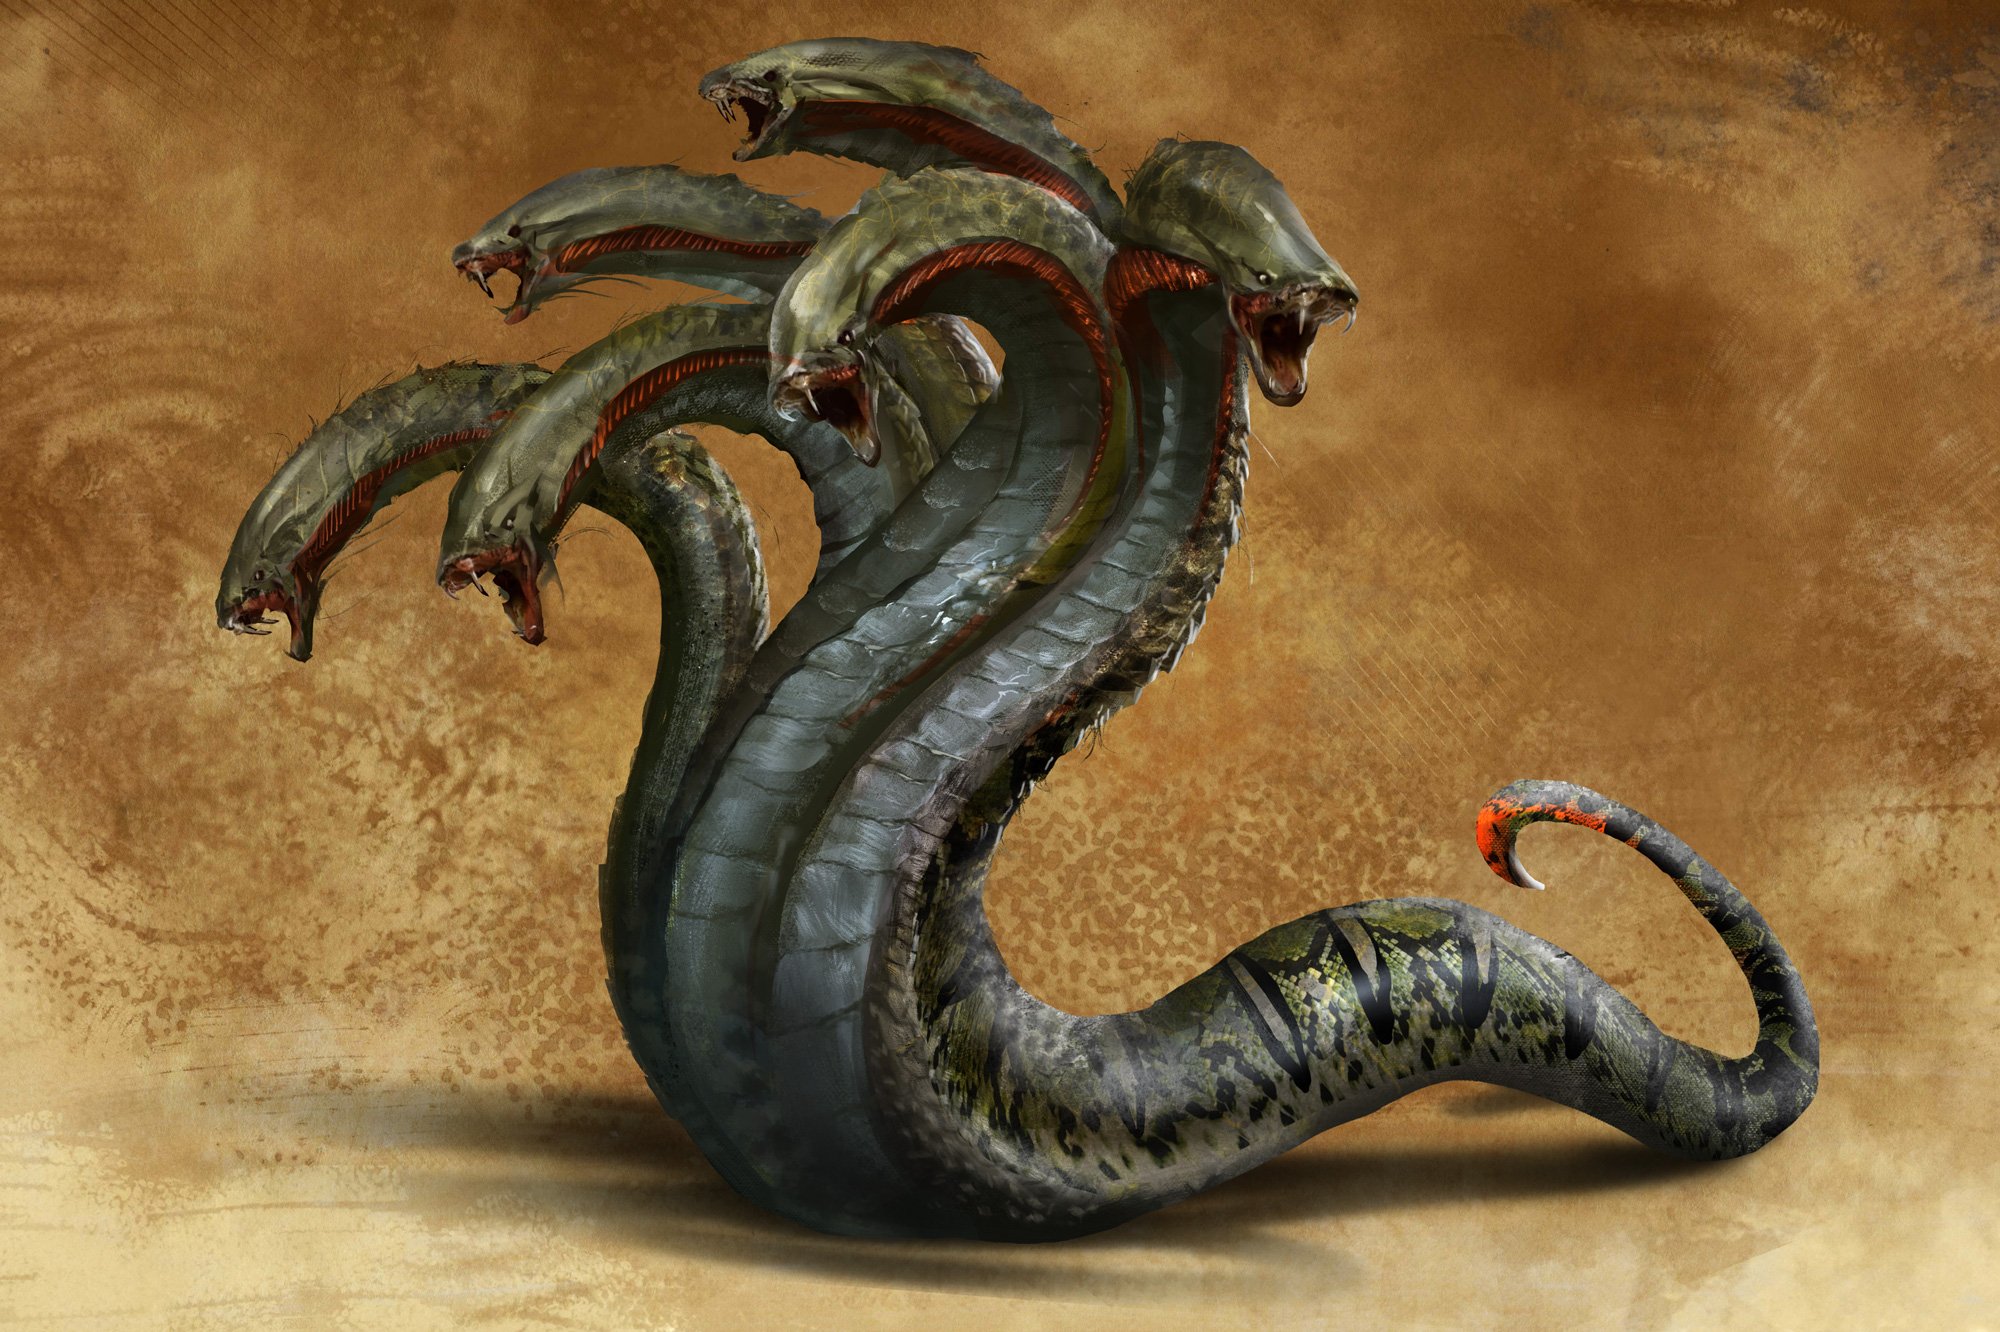 heroes, Might, Magic, Strategy, Fantasy, Fighting, Adventure, Action, Online, 1hmm, Monster, Dragon, Snake Wallpaper